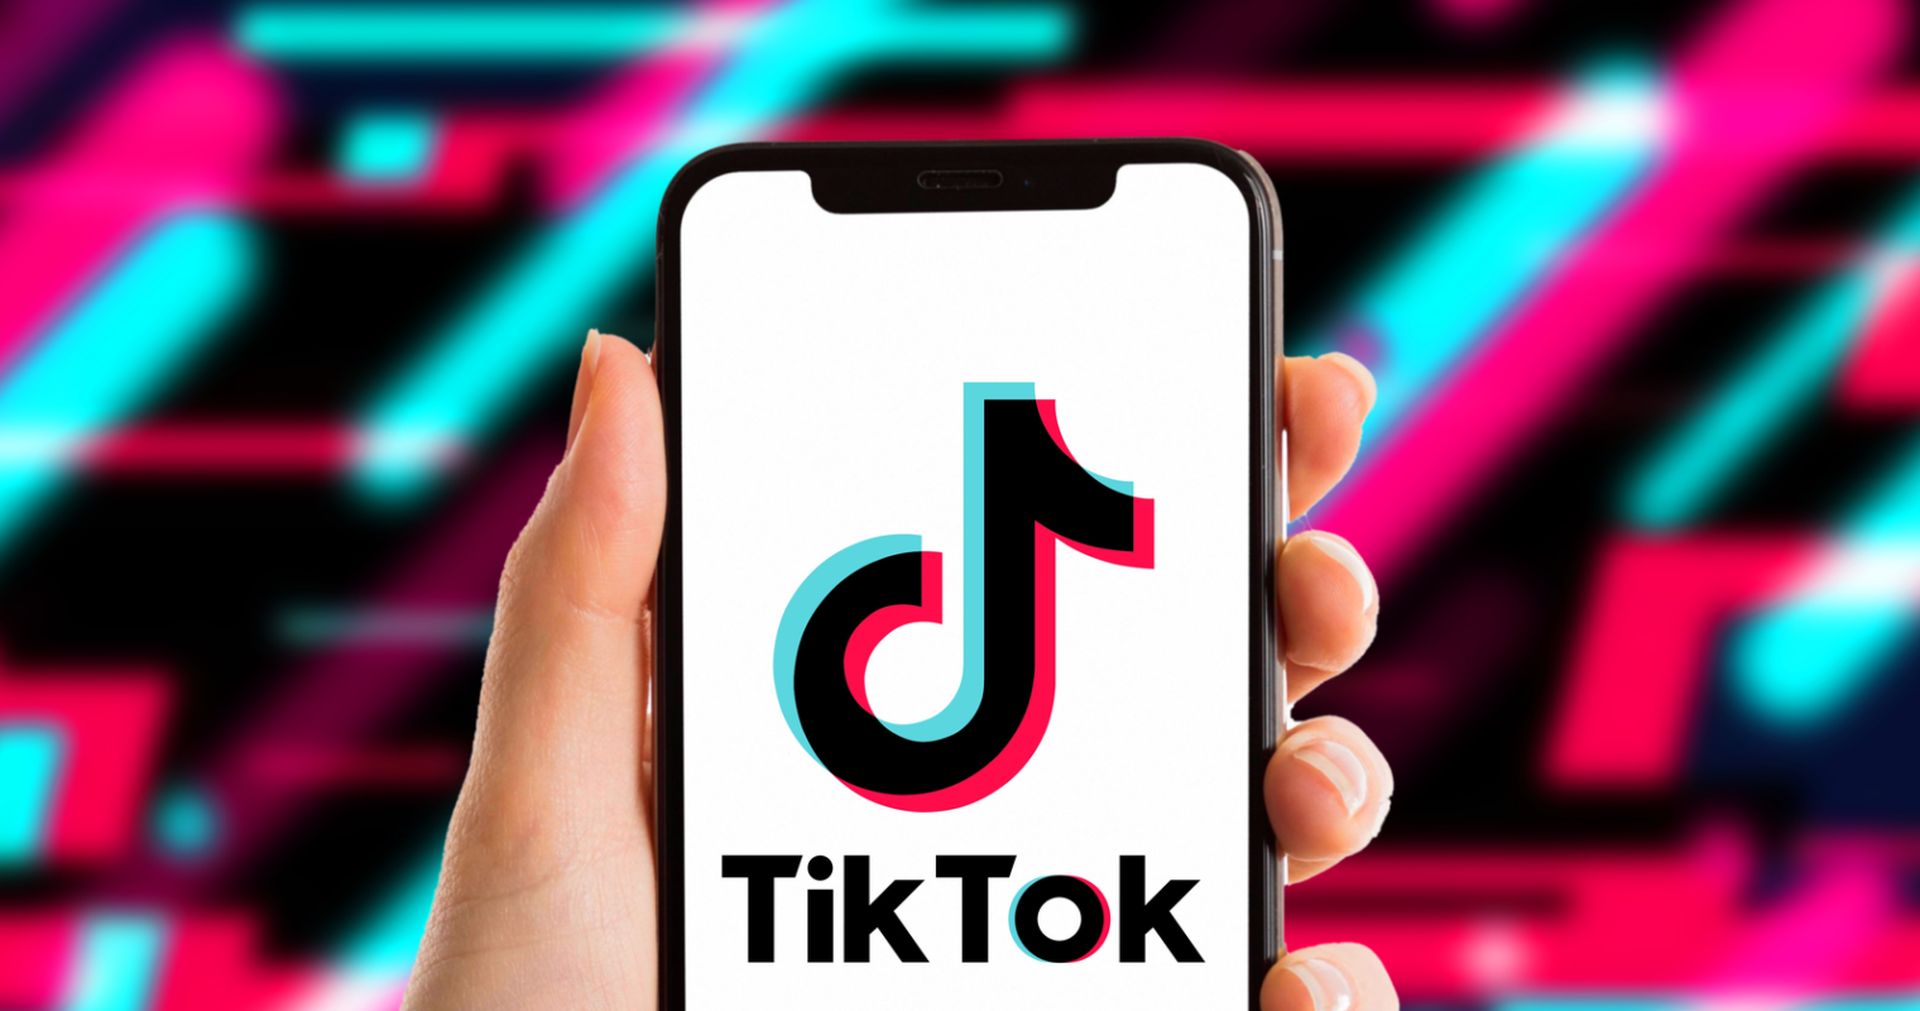 In this article, we are going to be covering is TikTok banned in US and explain what really happened during Attorney General’s press conference.